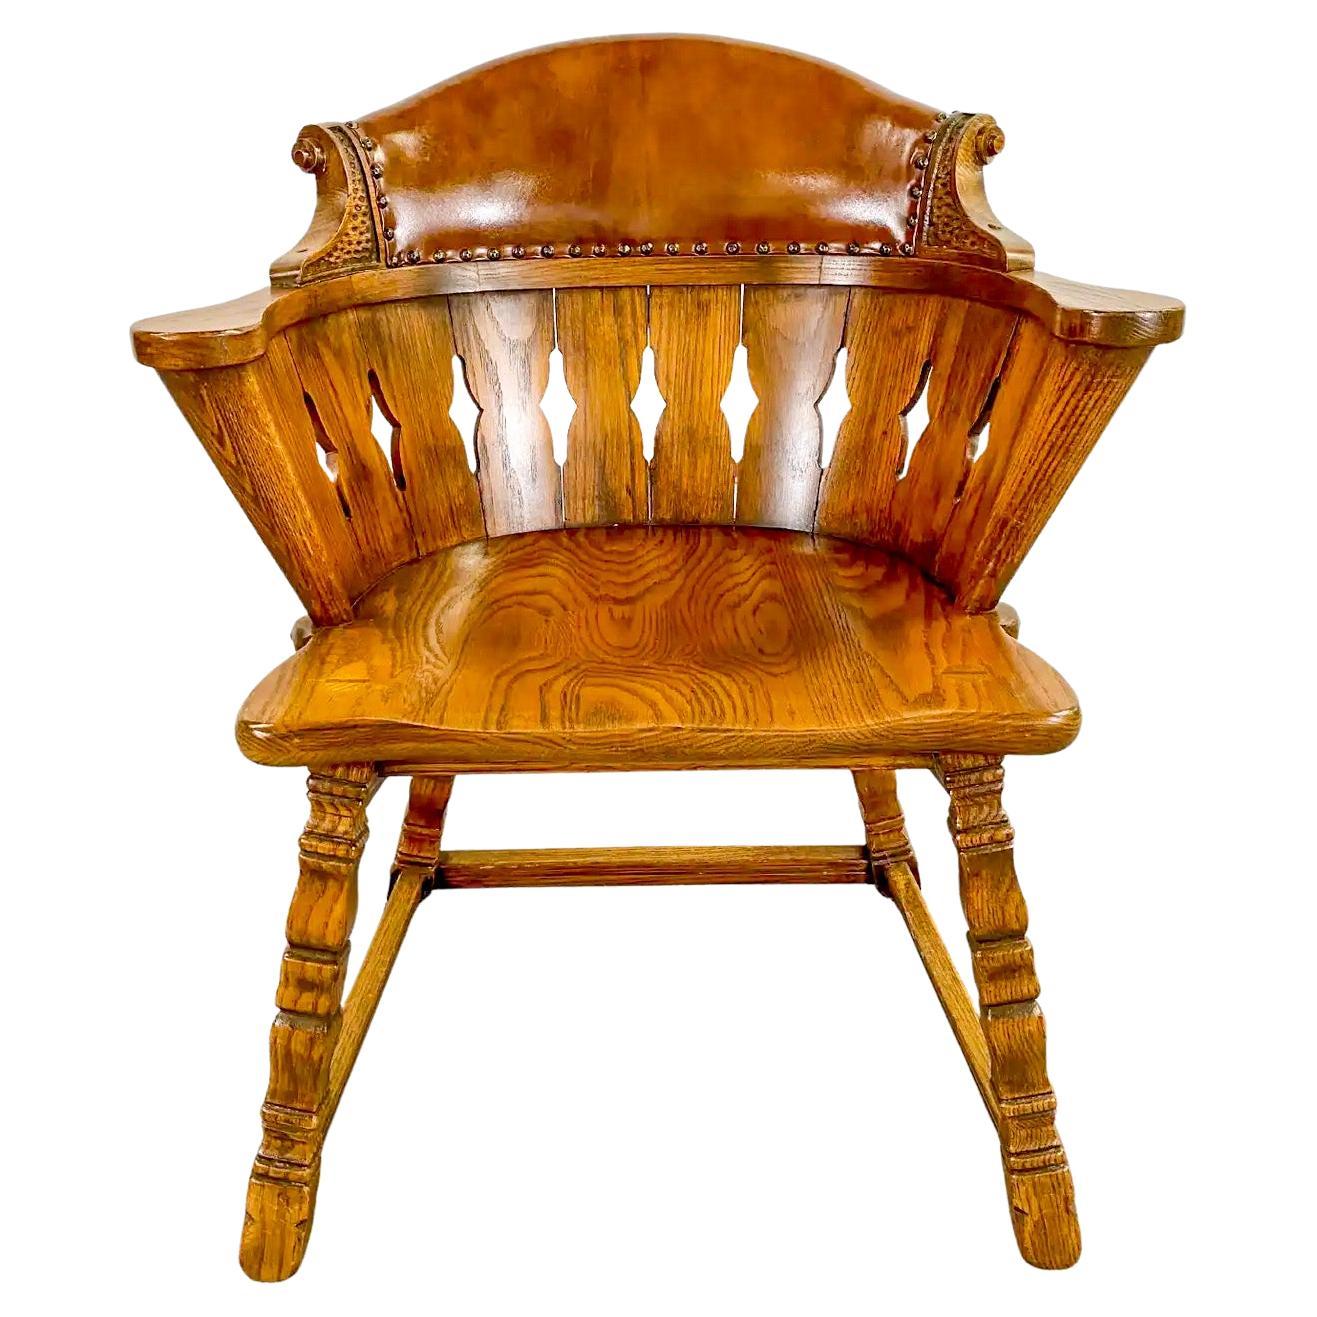 A rare set of 4 Romweber Viking oak leather back captains dining or side armchairs in Jacobean style. The quality chairs are hand crafted of oak showing beautiful grain and feature fine craving details. The barrel shaped chairs are sturdy and